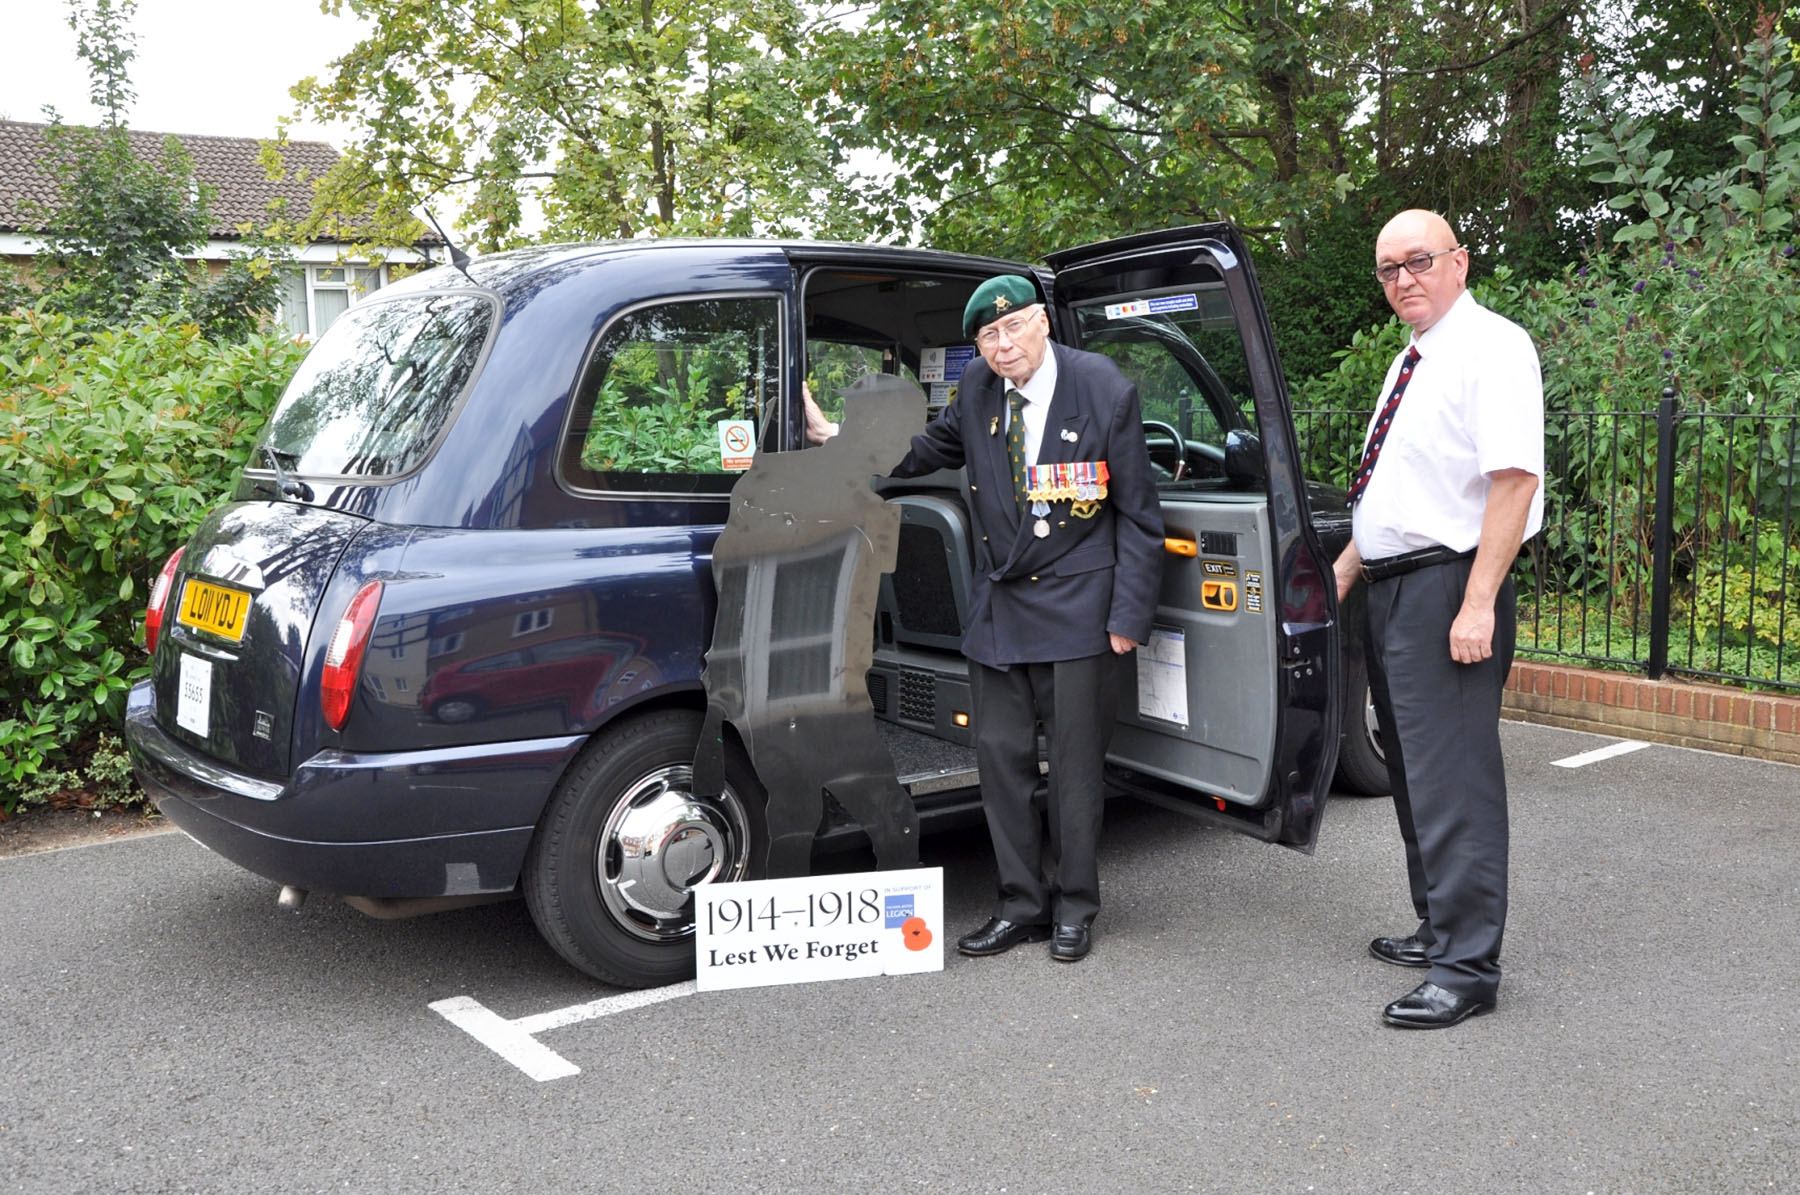 A visit to the Royal British Legion in Surrey